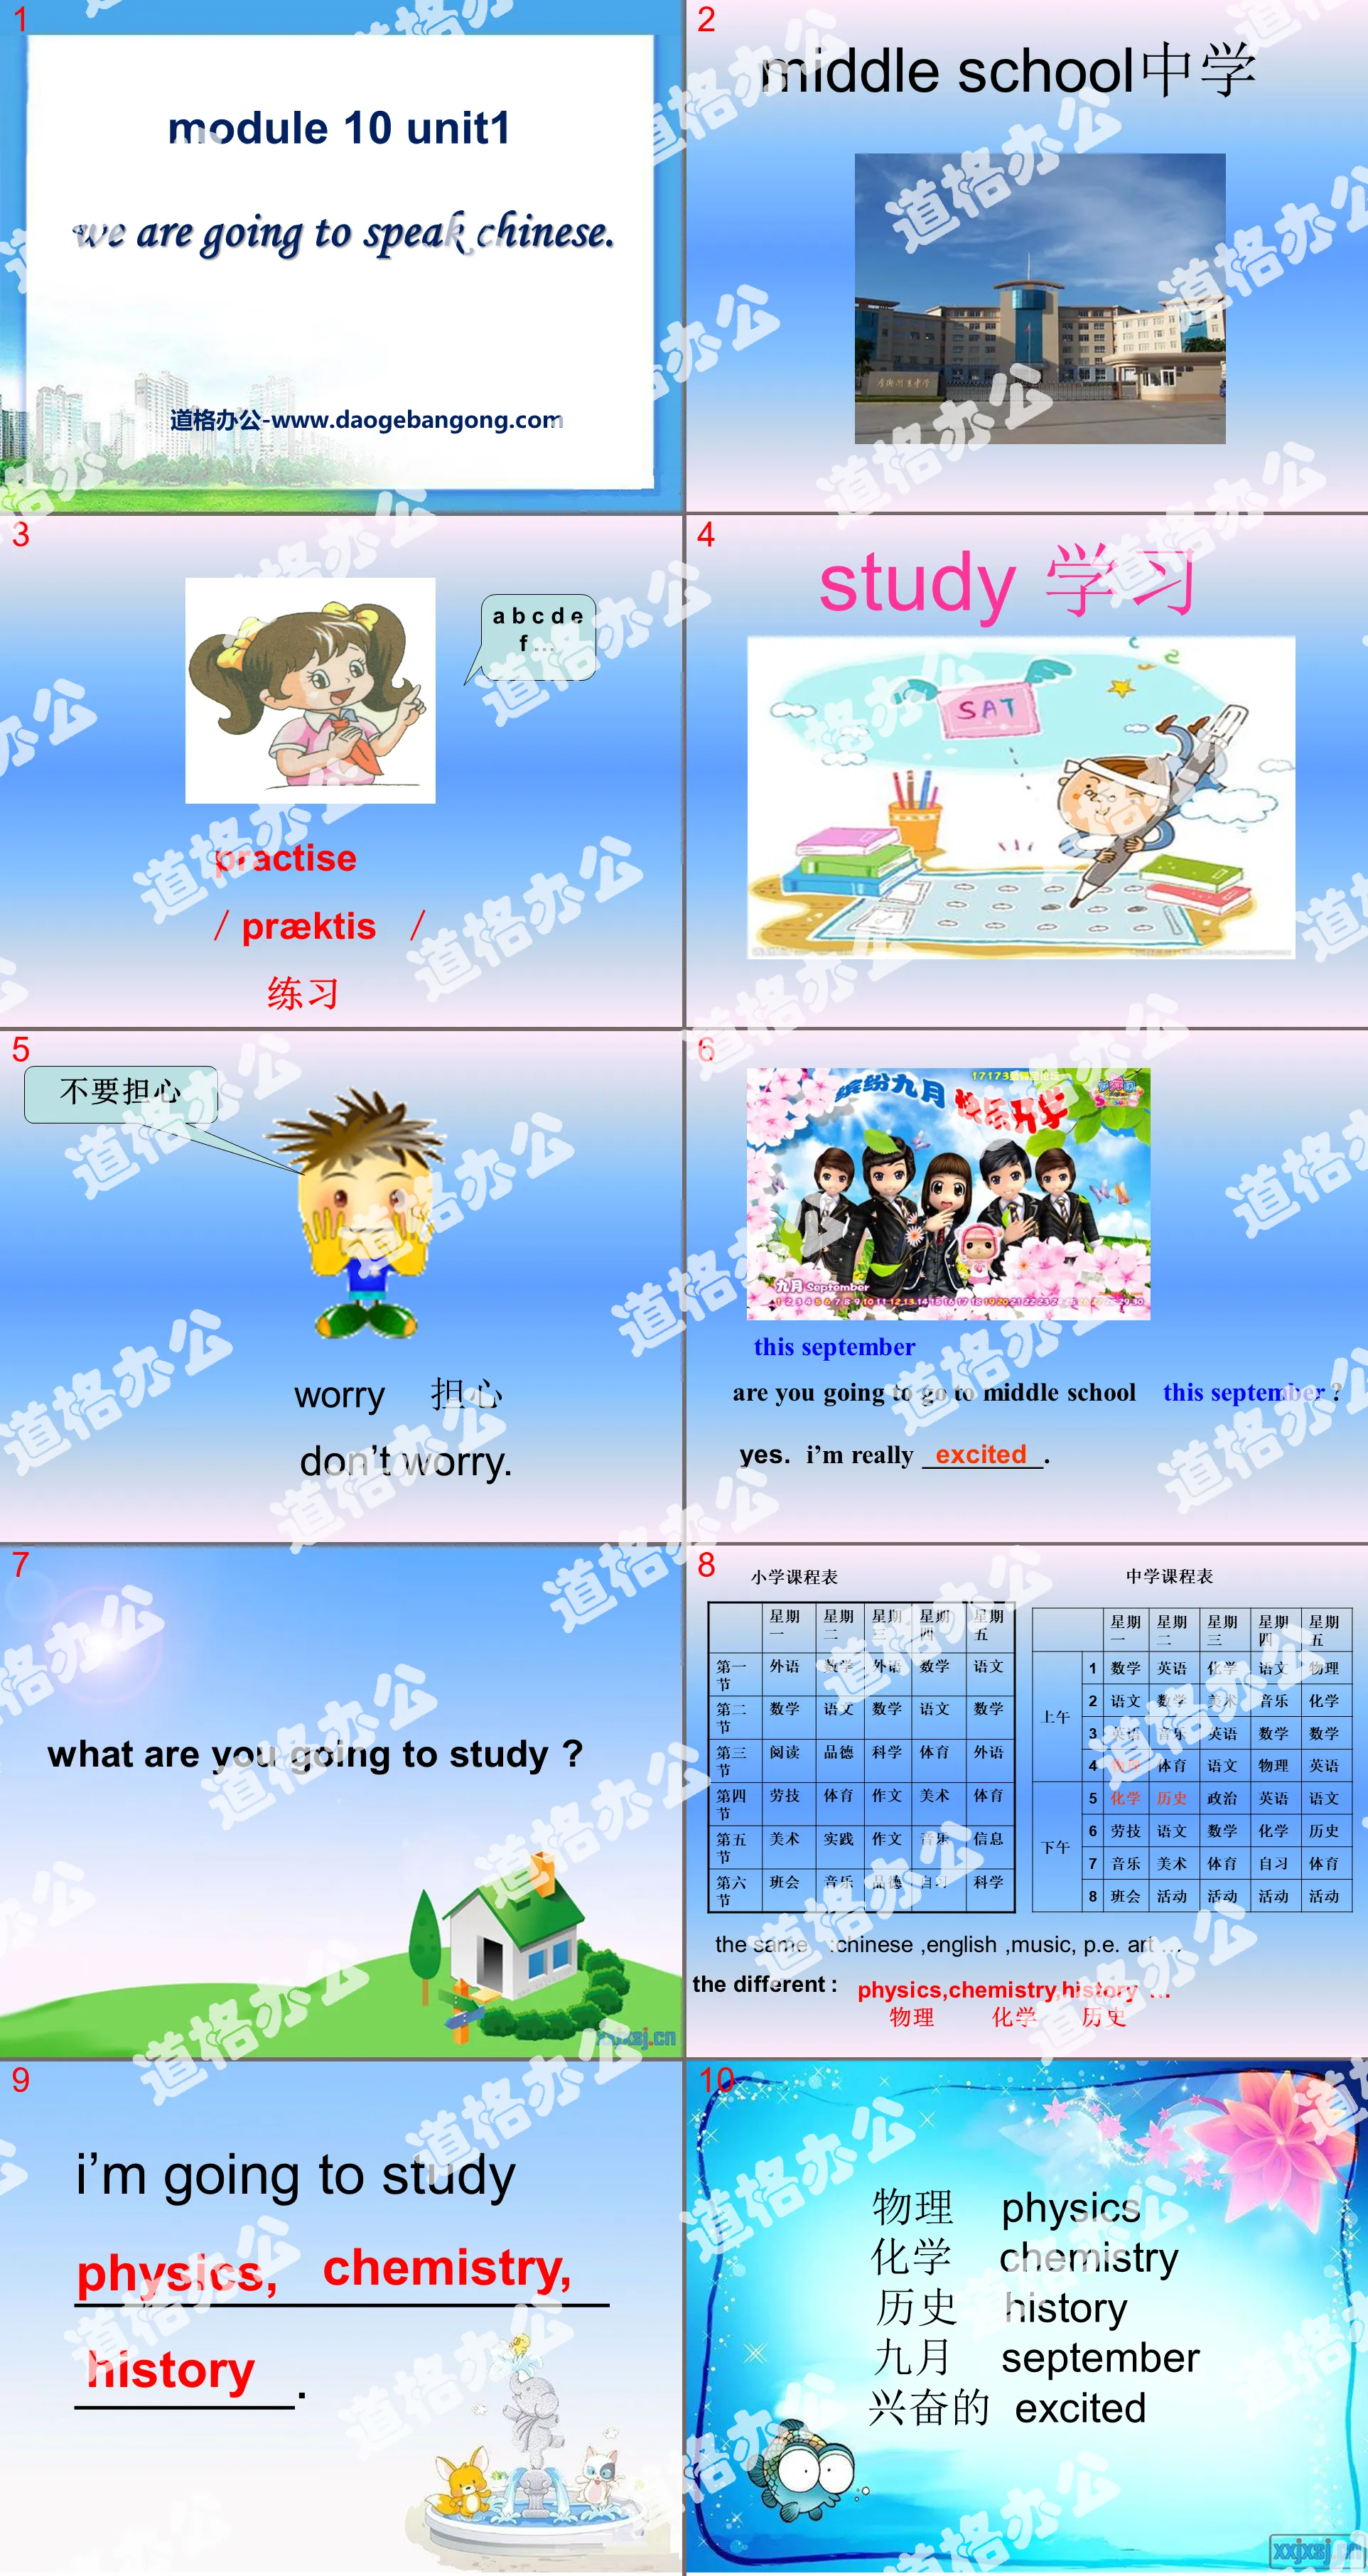 "We are going to speak Chinese" PPT courseware 5